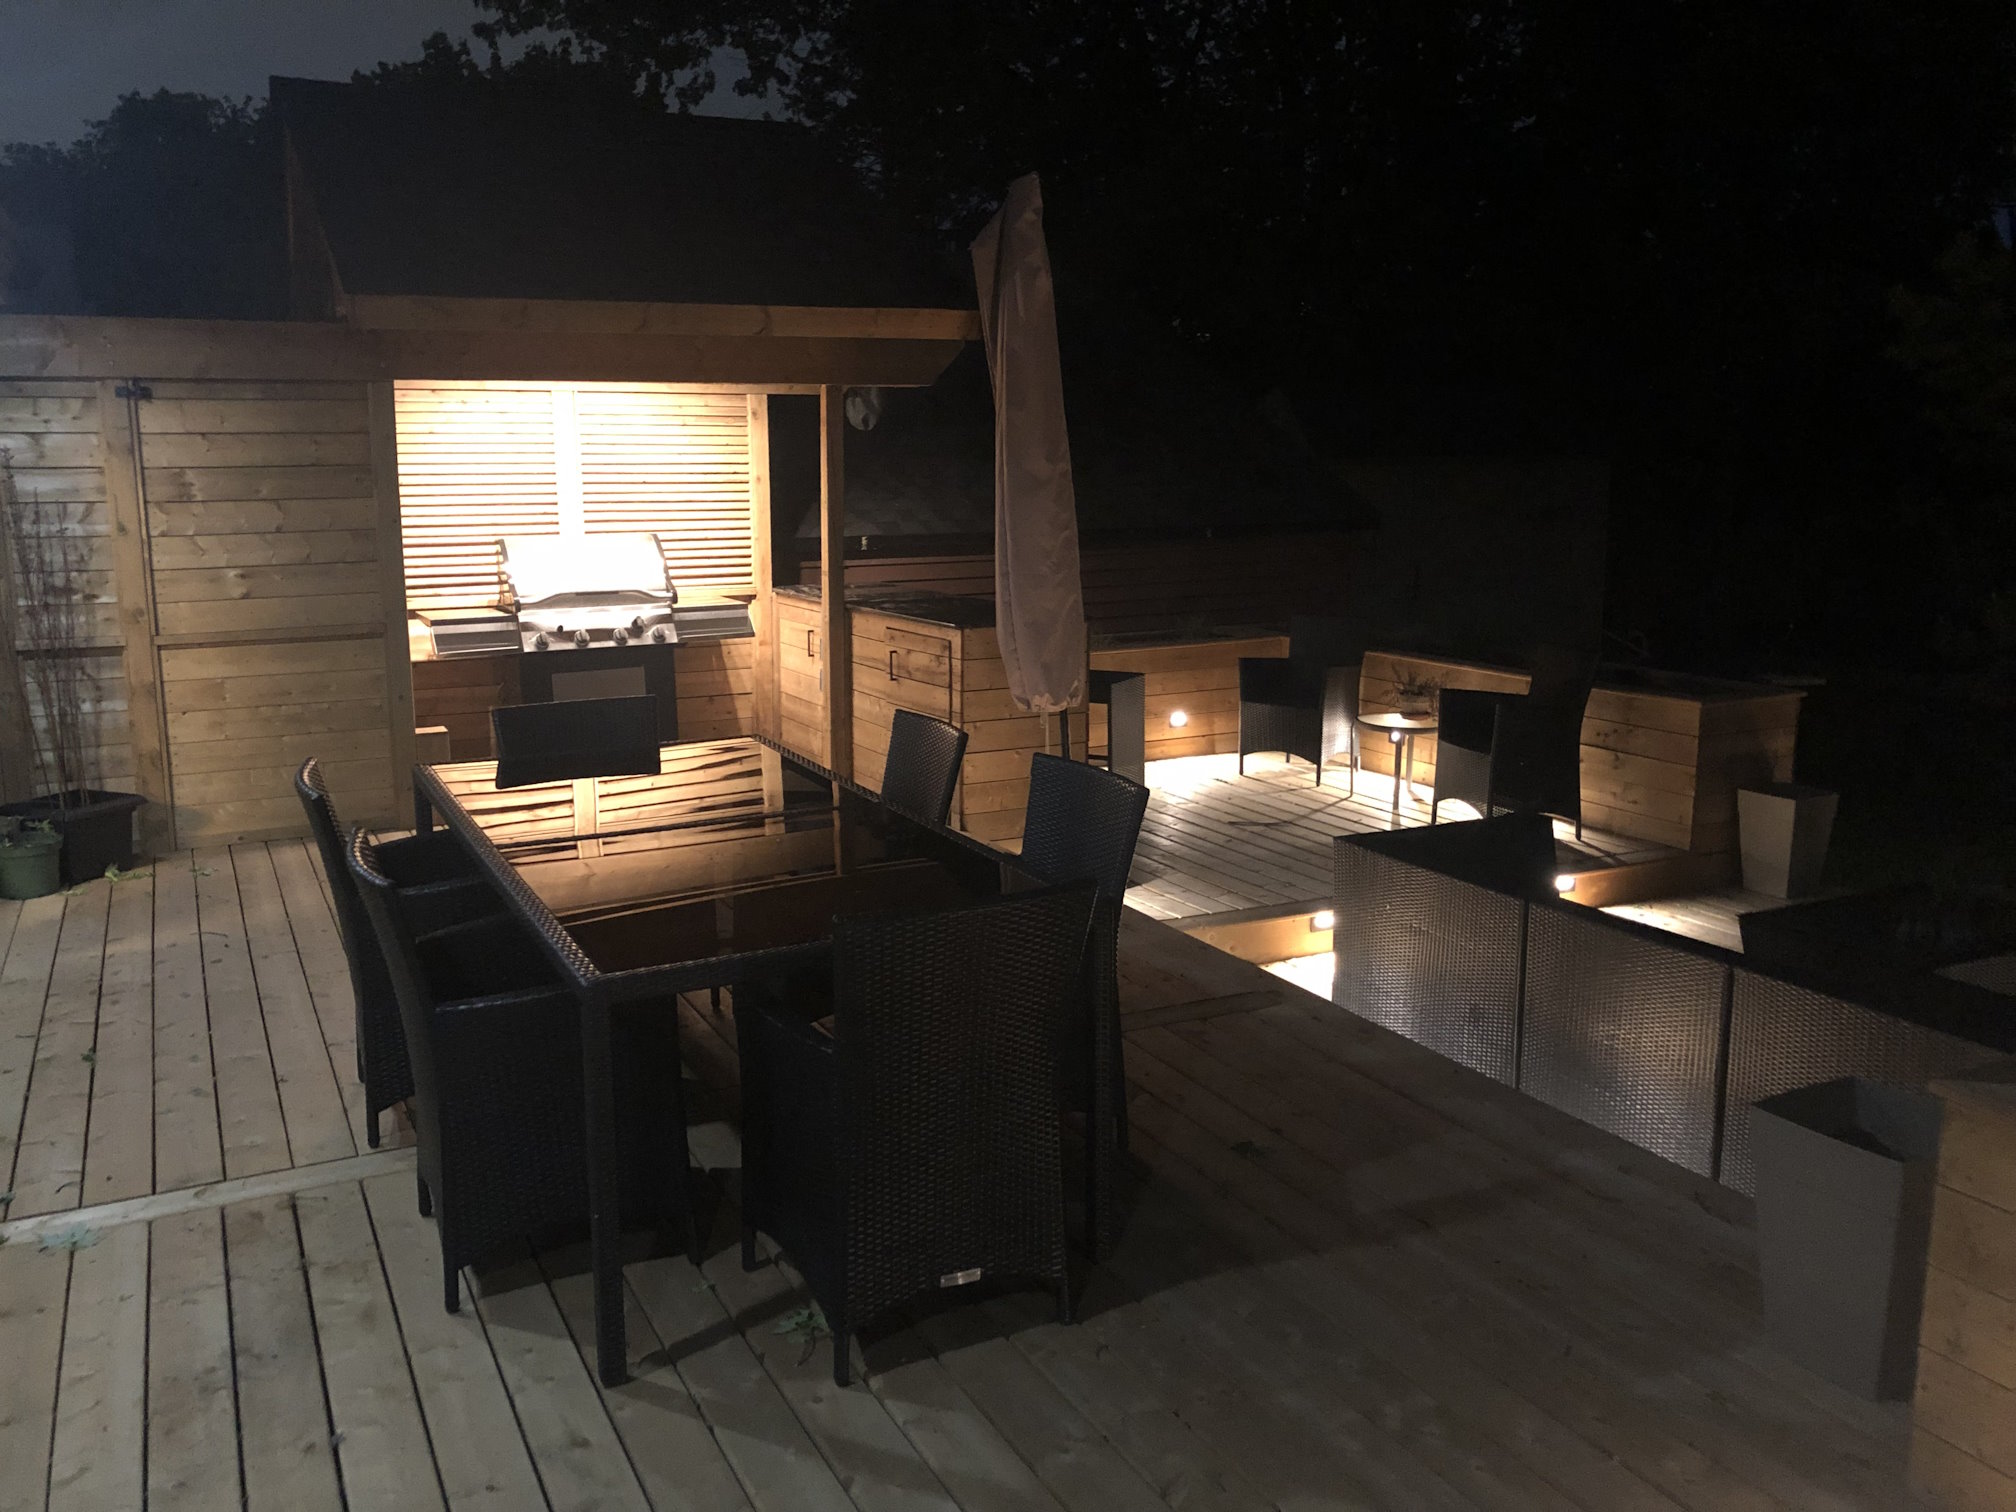 Spring 2022: 3 Zones of lighting: BBQ, steps and deck down lights